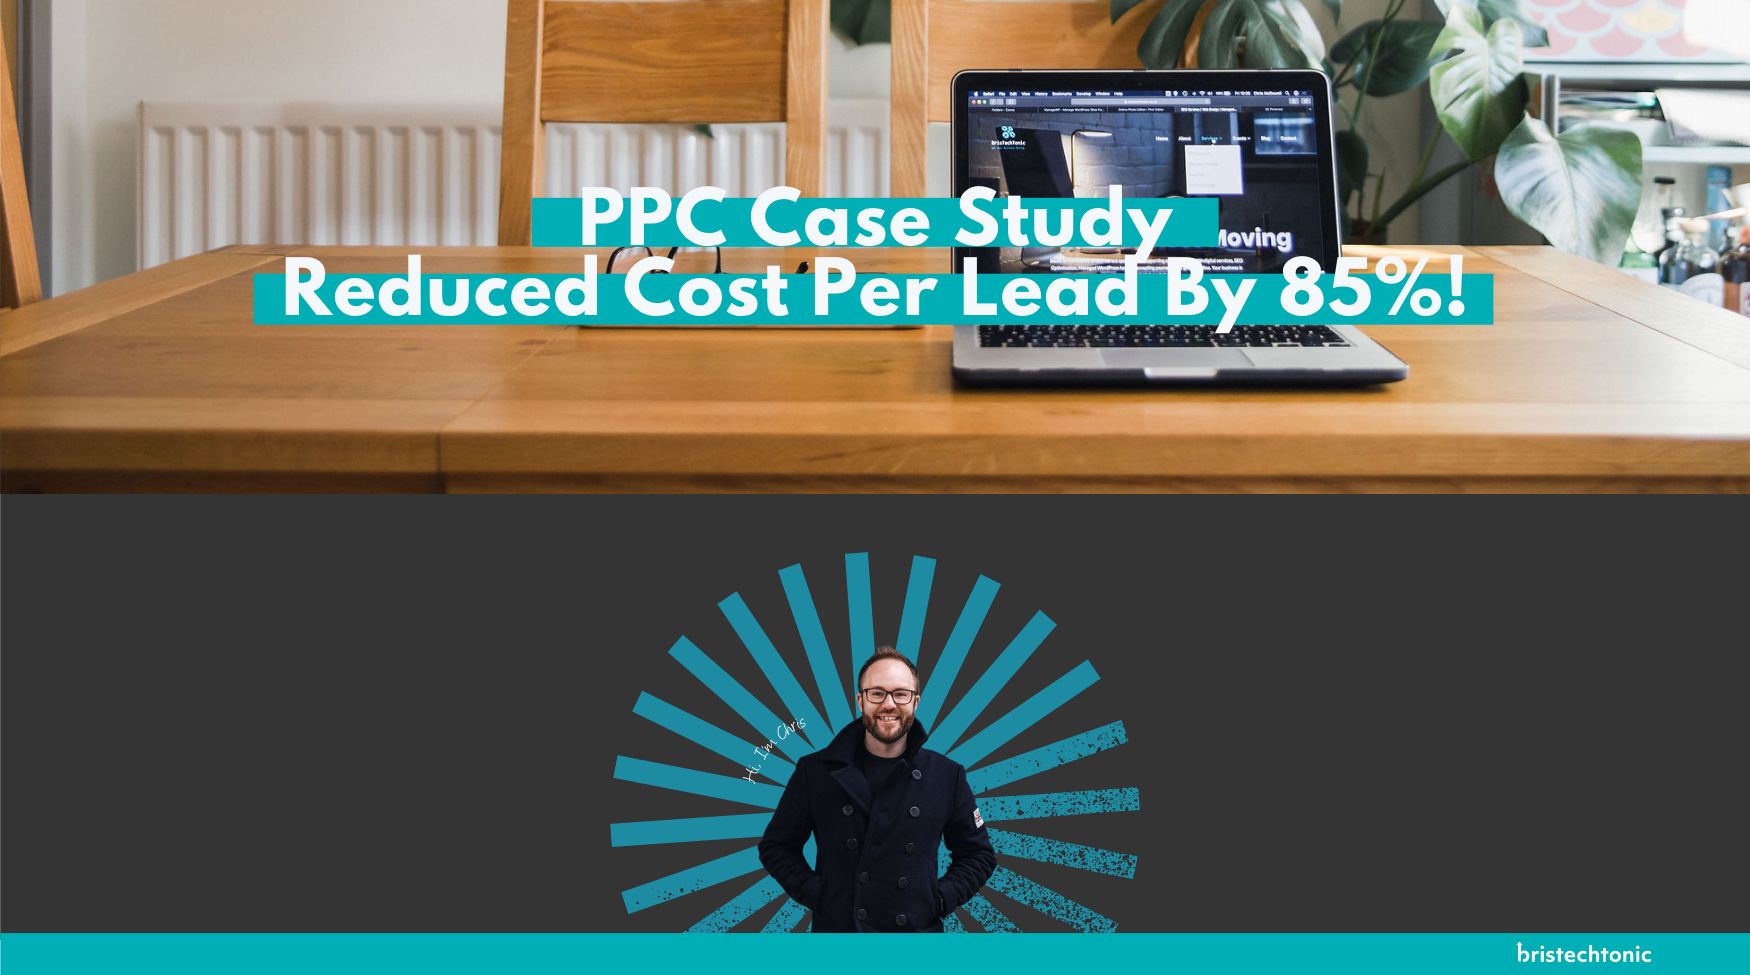 Reduced Cost Per Lead By 85%!